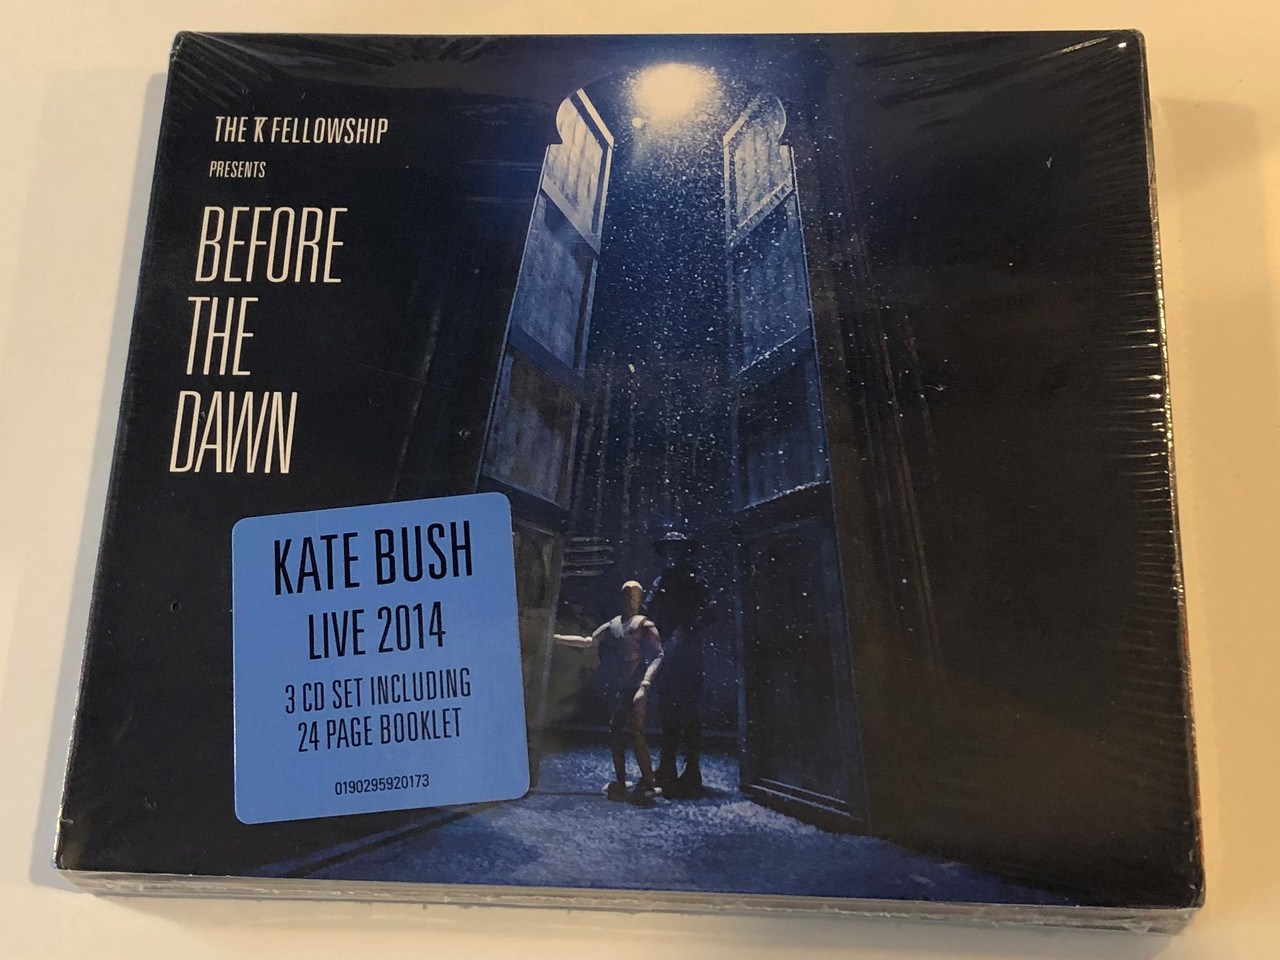 The KT Fellowship presents - Before The Dawn / Kate Bush,, Live 2014 / 3 CD  Set Including 24 Page Brooklet / Fish People 3x Audio CD 2016 /  0190295920173 - bibleinmylanguage